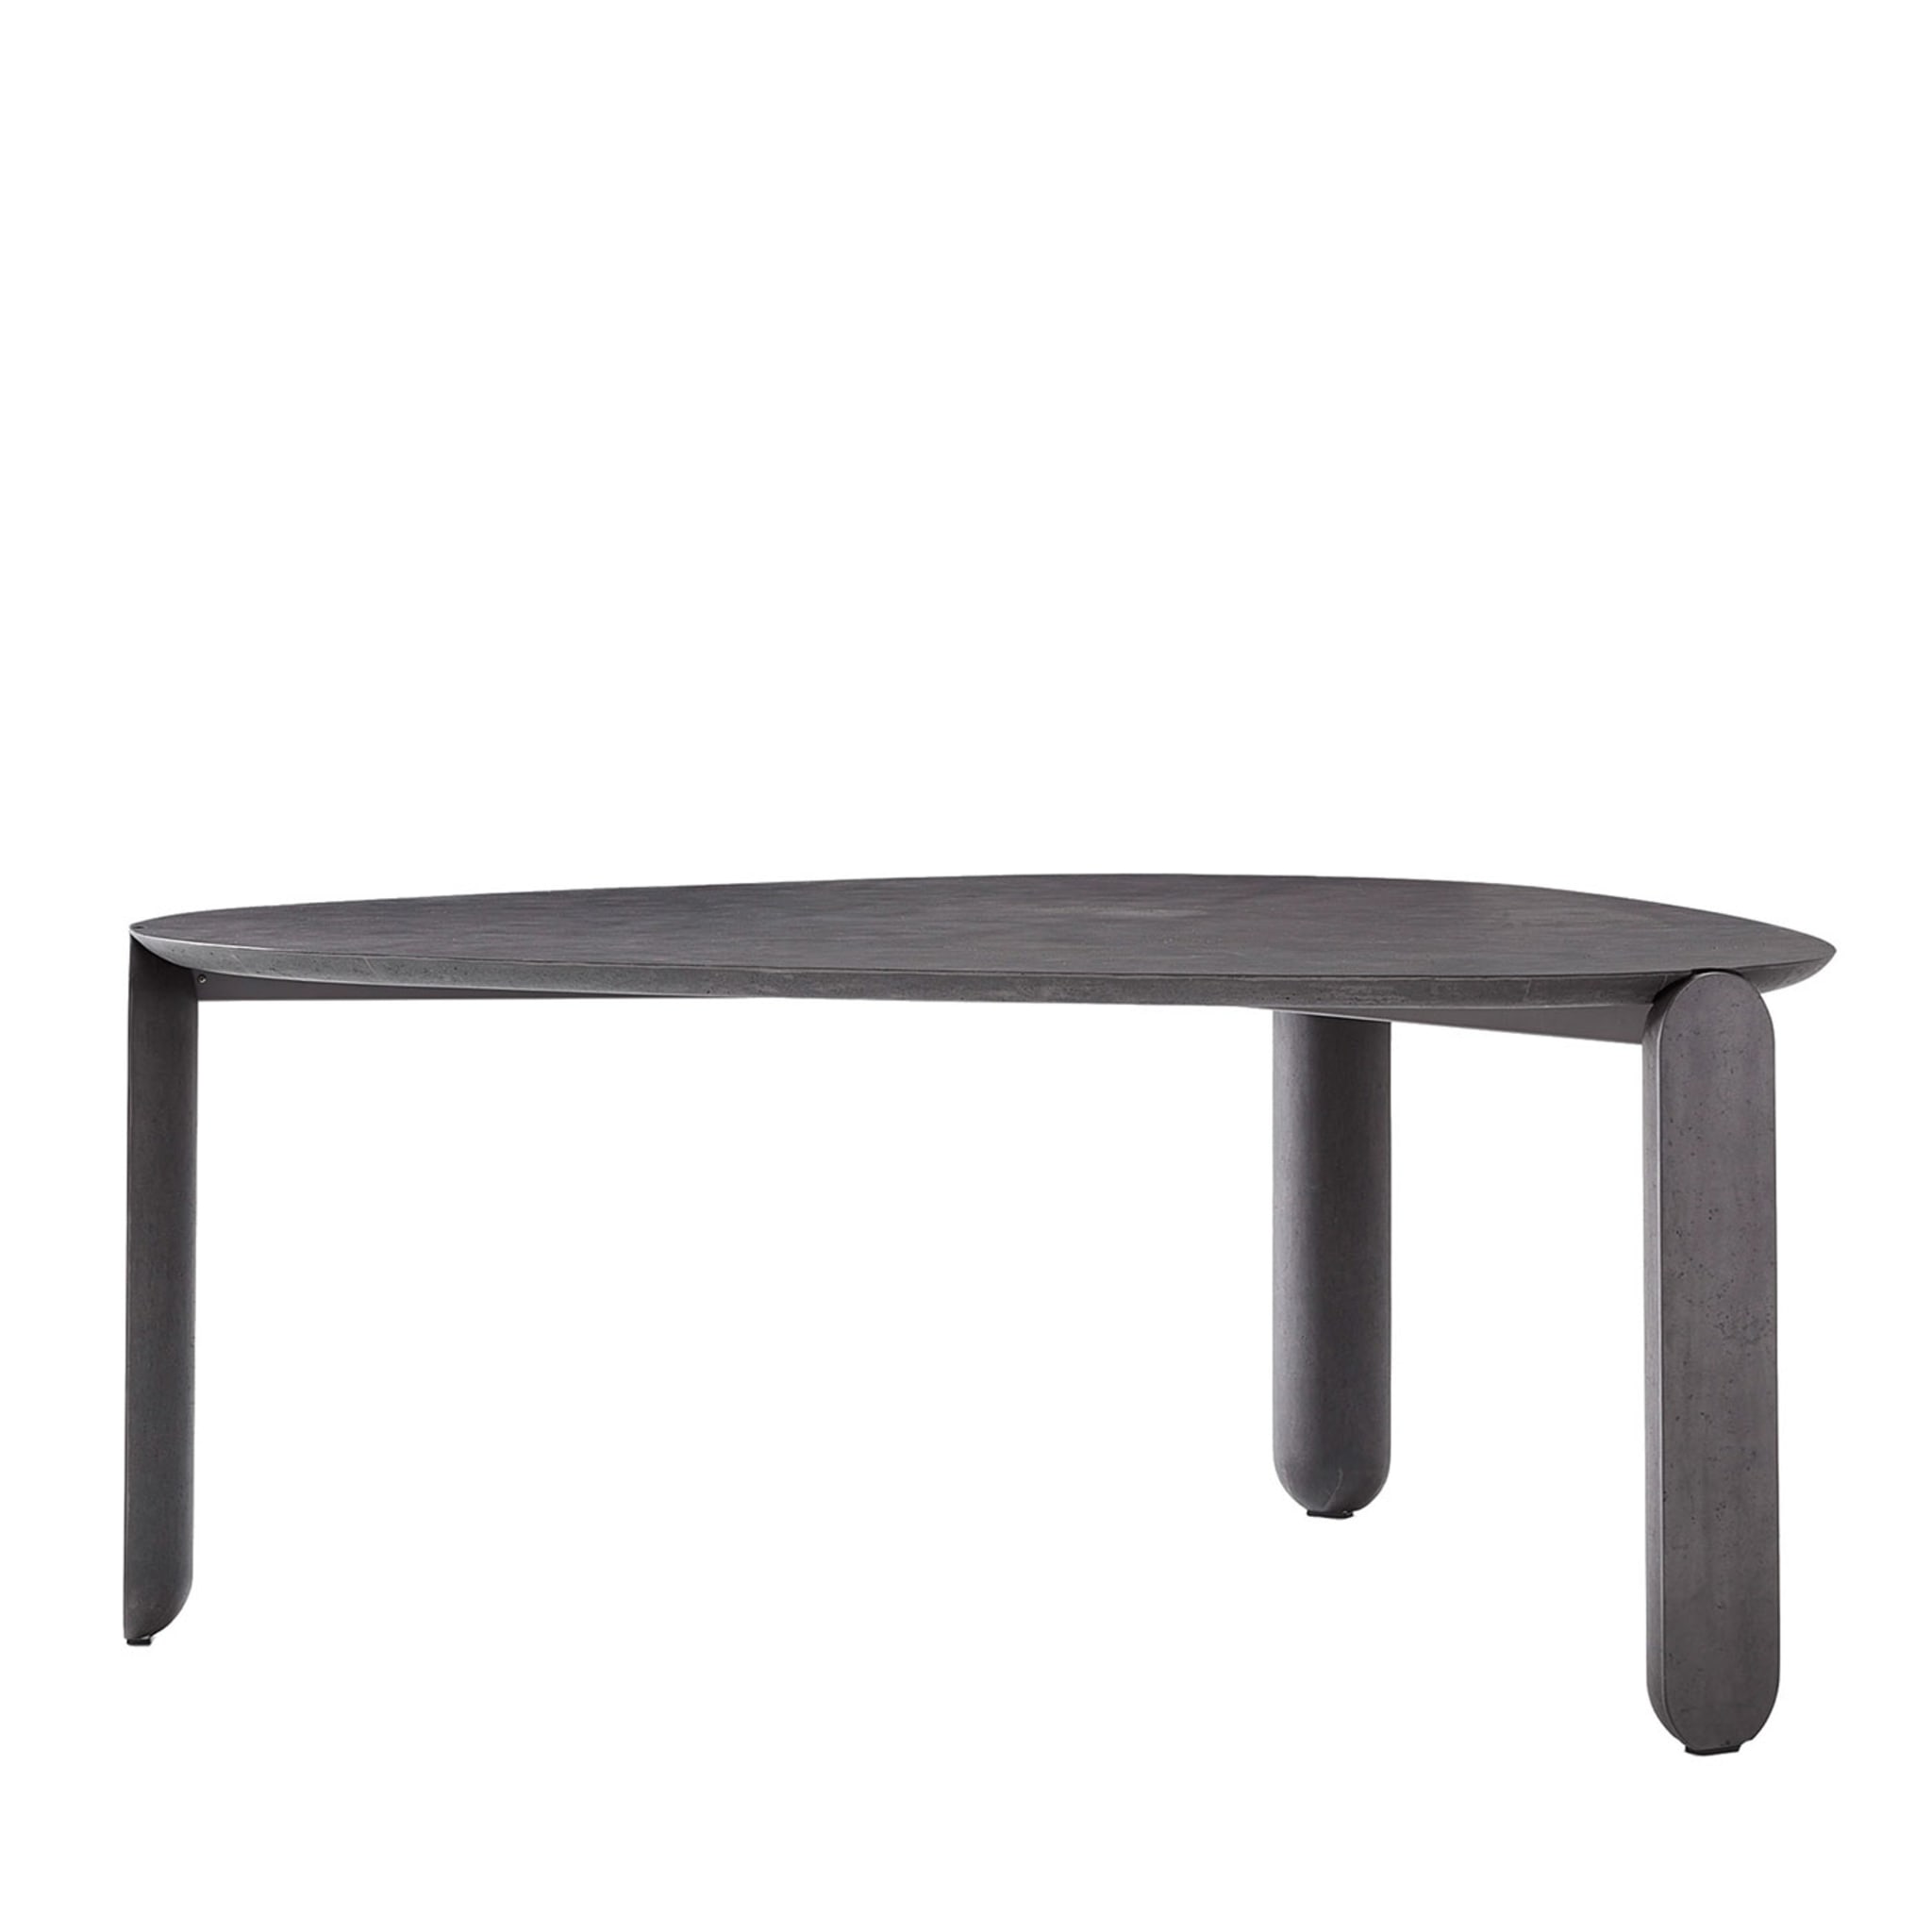 Lido Table by Parisotto and Formenton - Main view